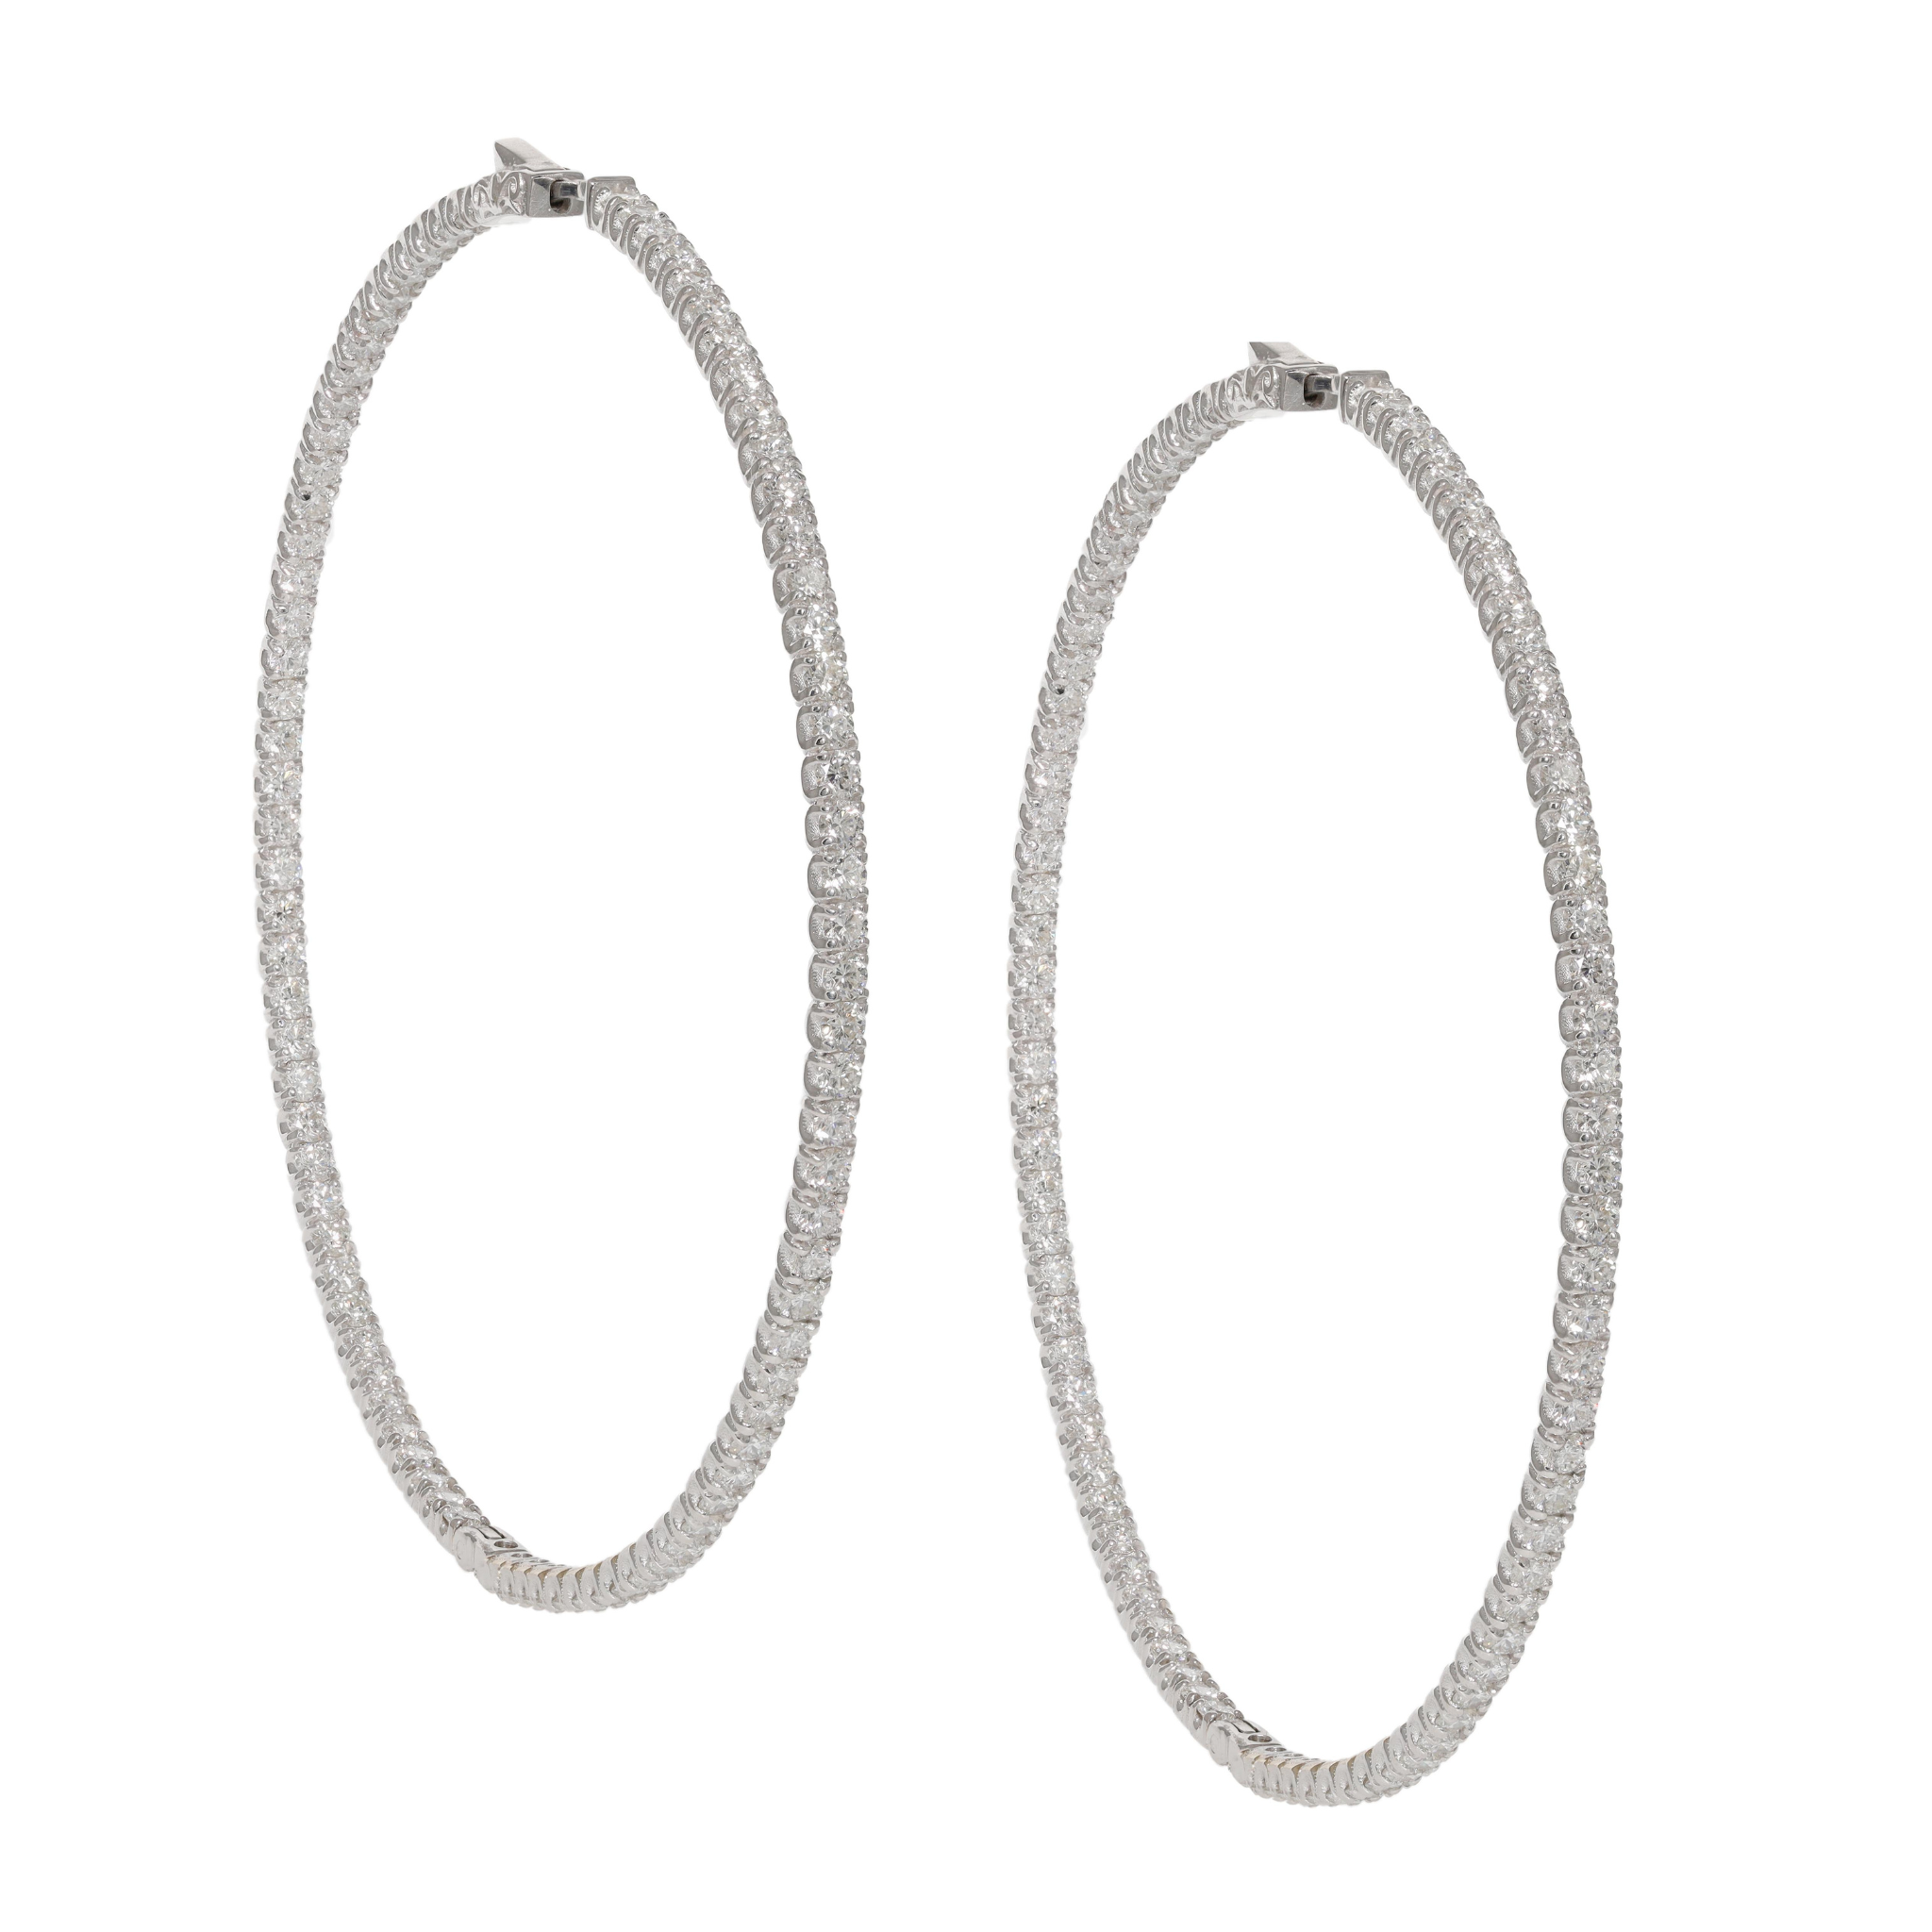 18 Kt White Gold 3.00" Hoop Earrings with 8.70 cts.jpg